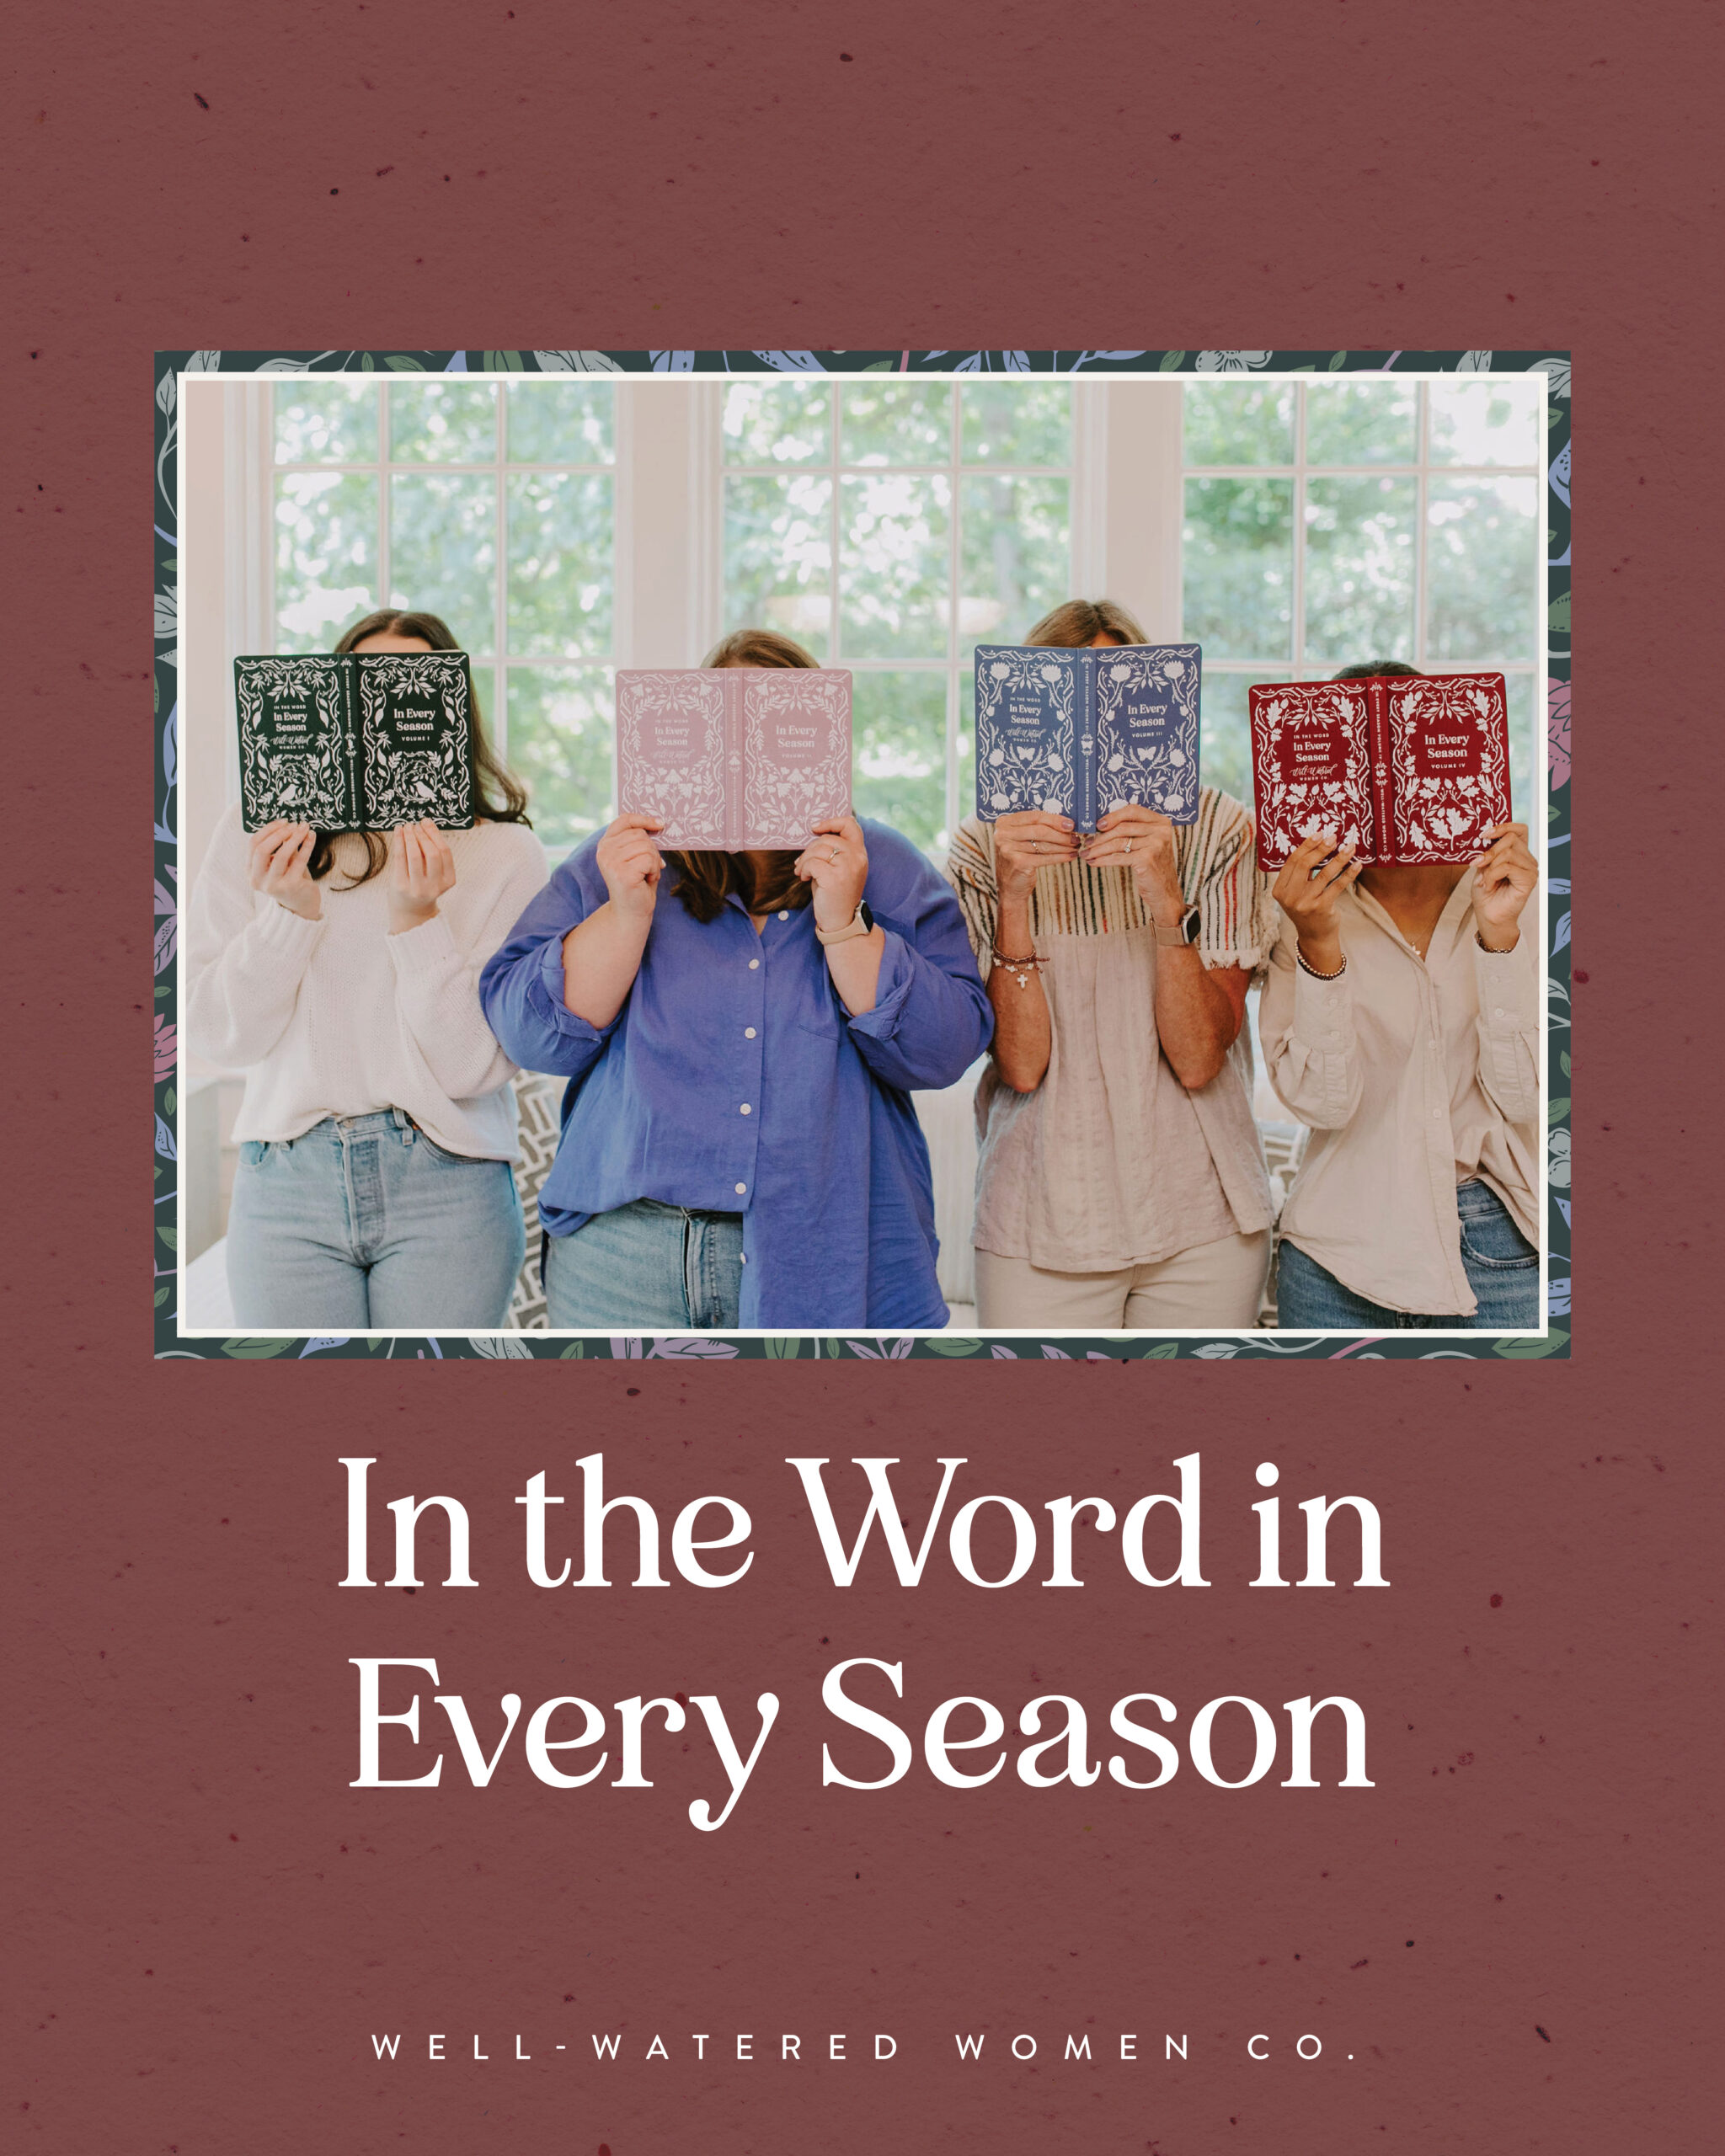 In the Word in Every Season – an article from Well-Watered Women